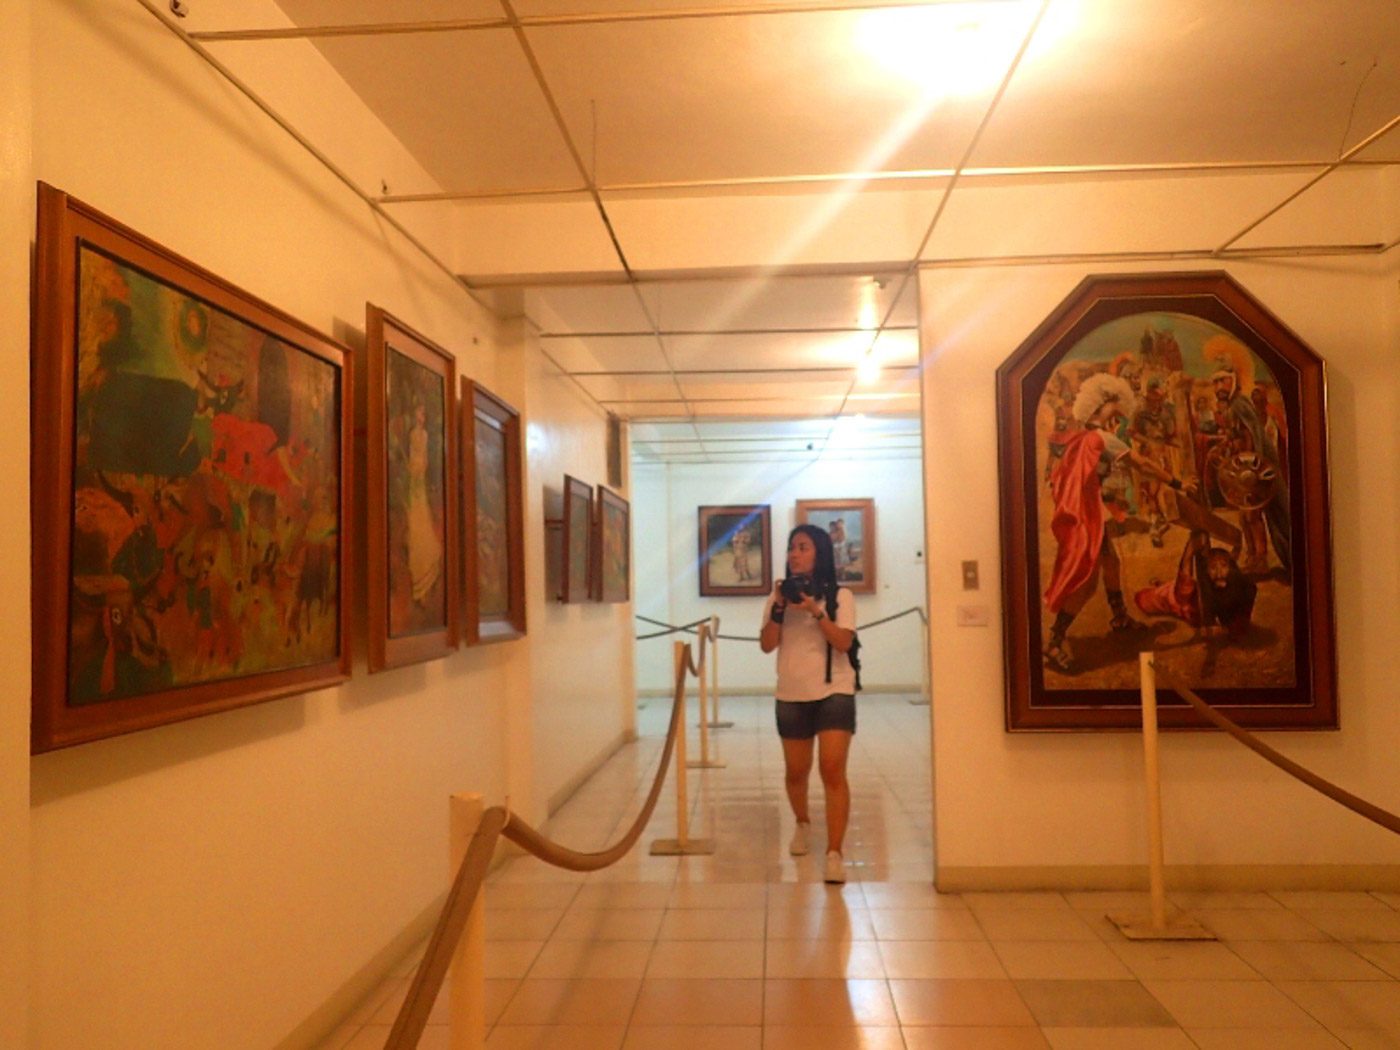 ARTISTS’ LEGACY. Among the galleries and museums you can visit on your art walk, Blanco Family Museum is perhaps among the best. It showcases artworks of the Blanco Family, with works by artists as young as 6 years old. 